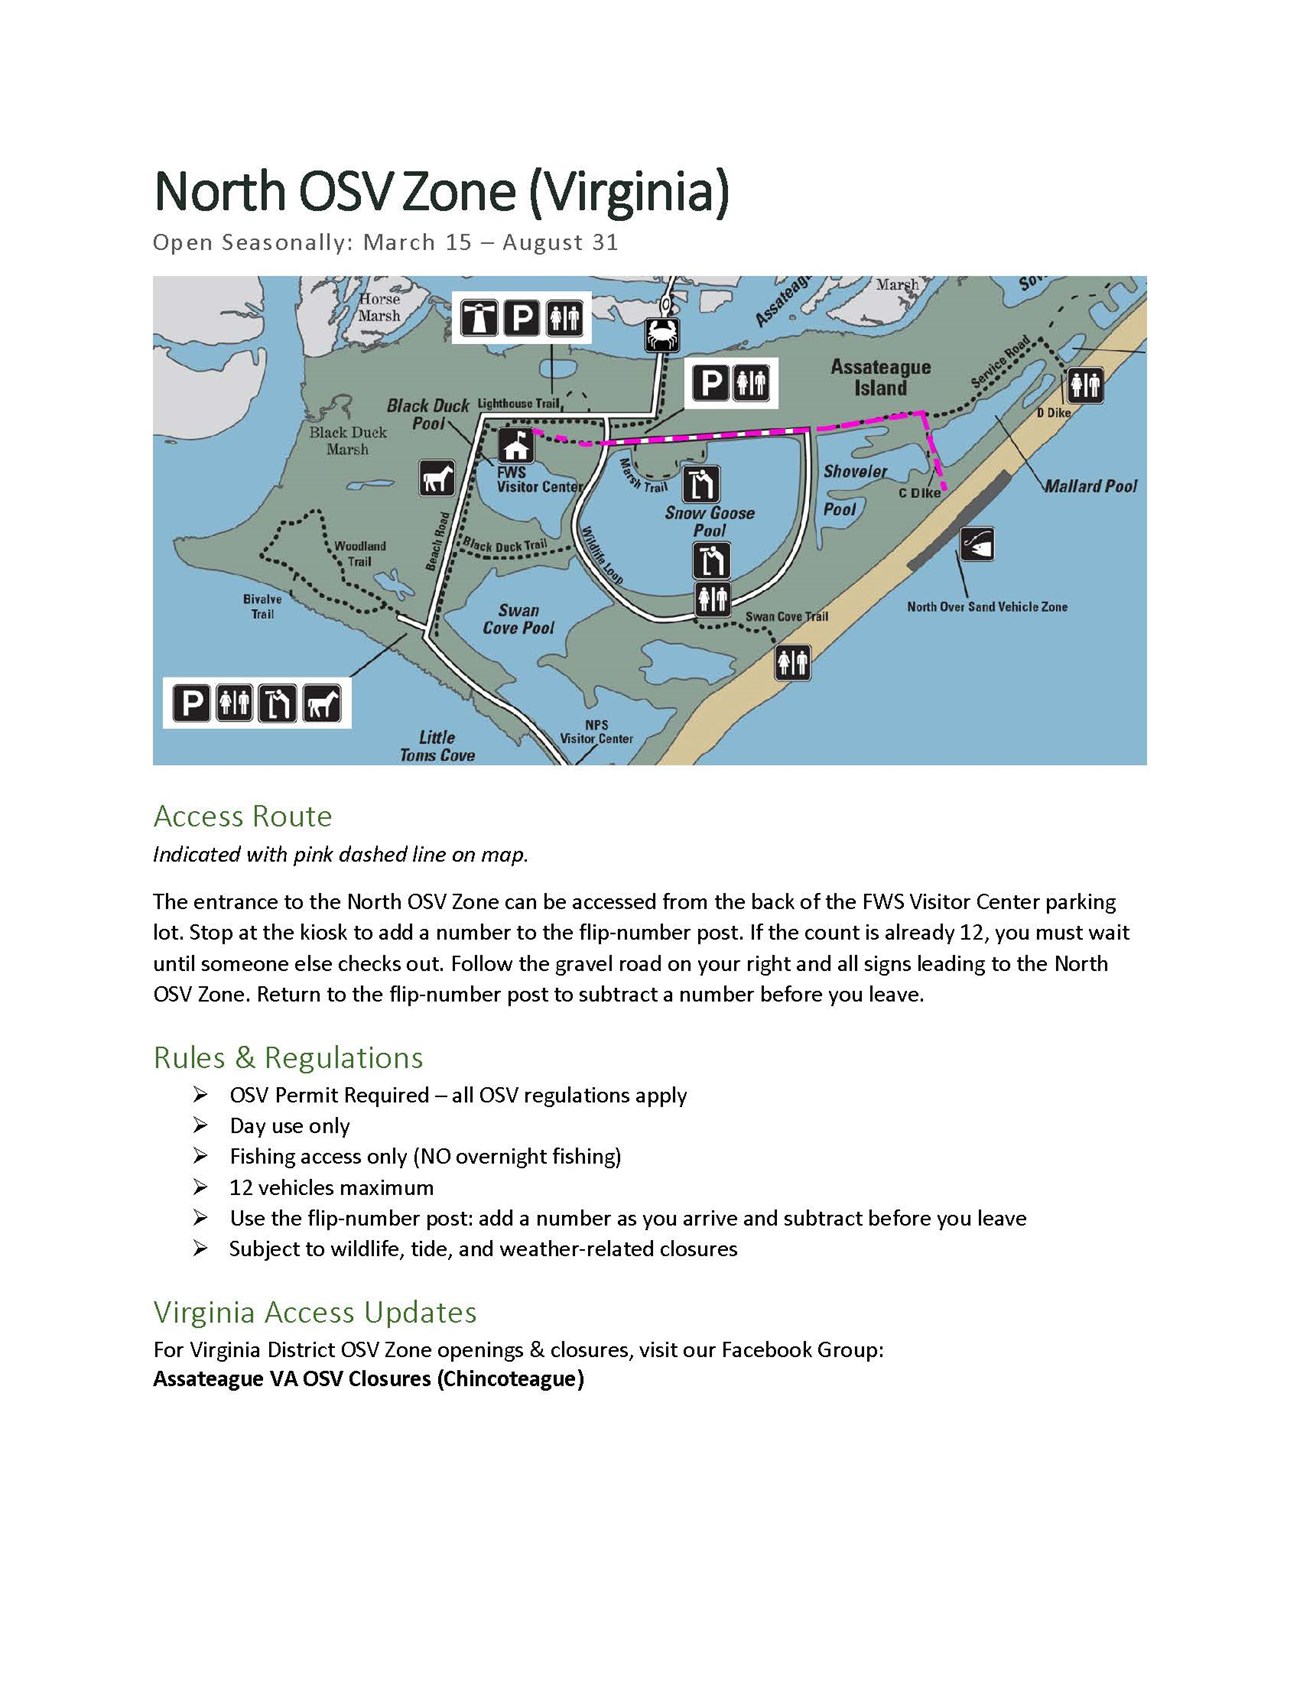 North OSV Zone Map and Regulations